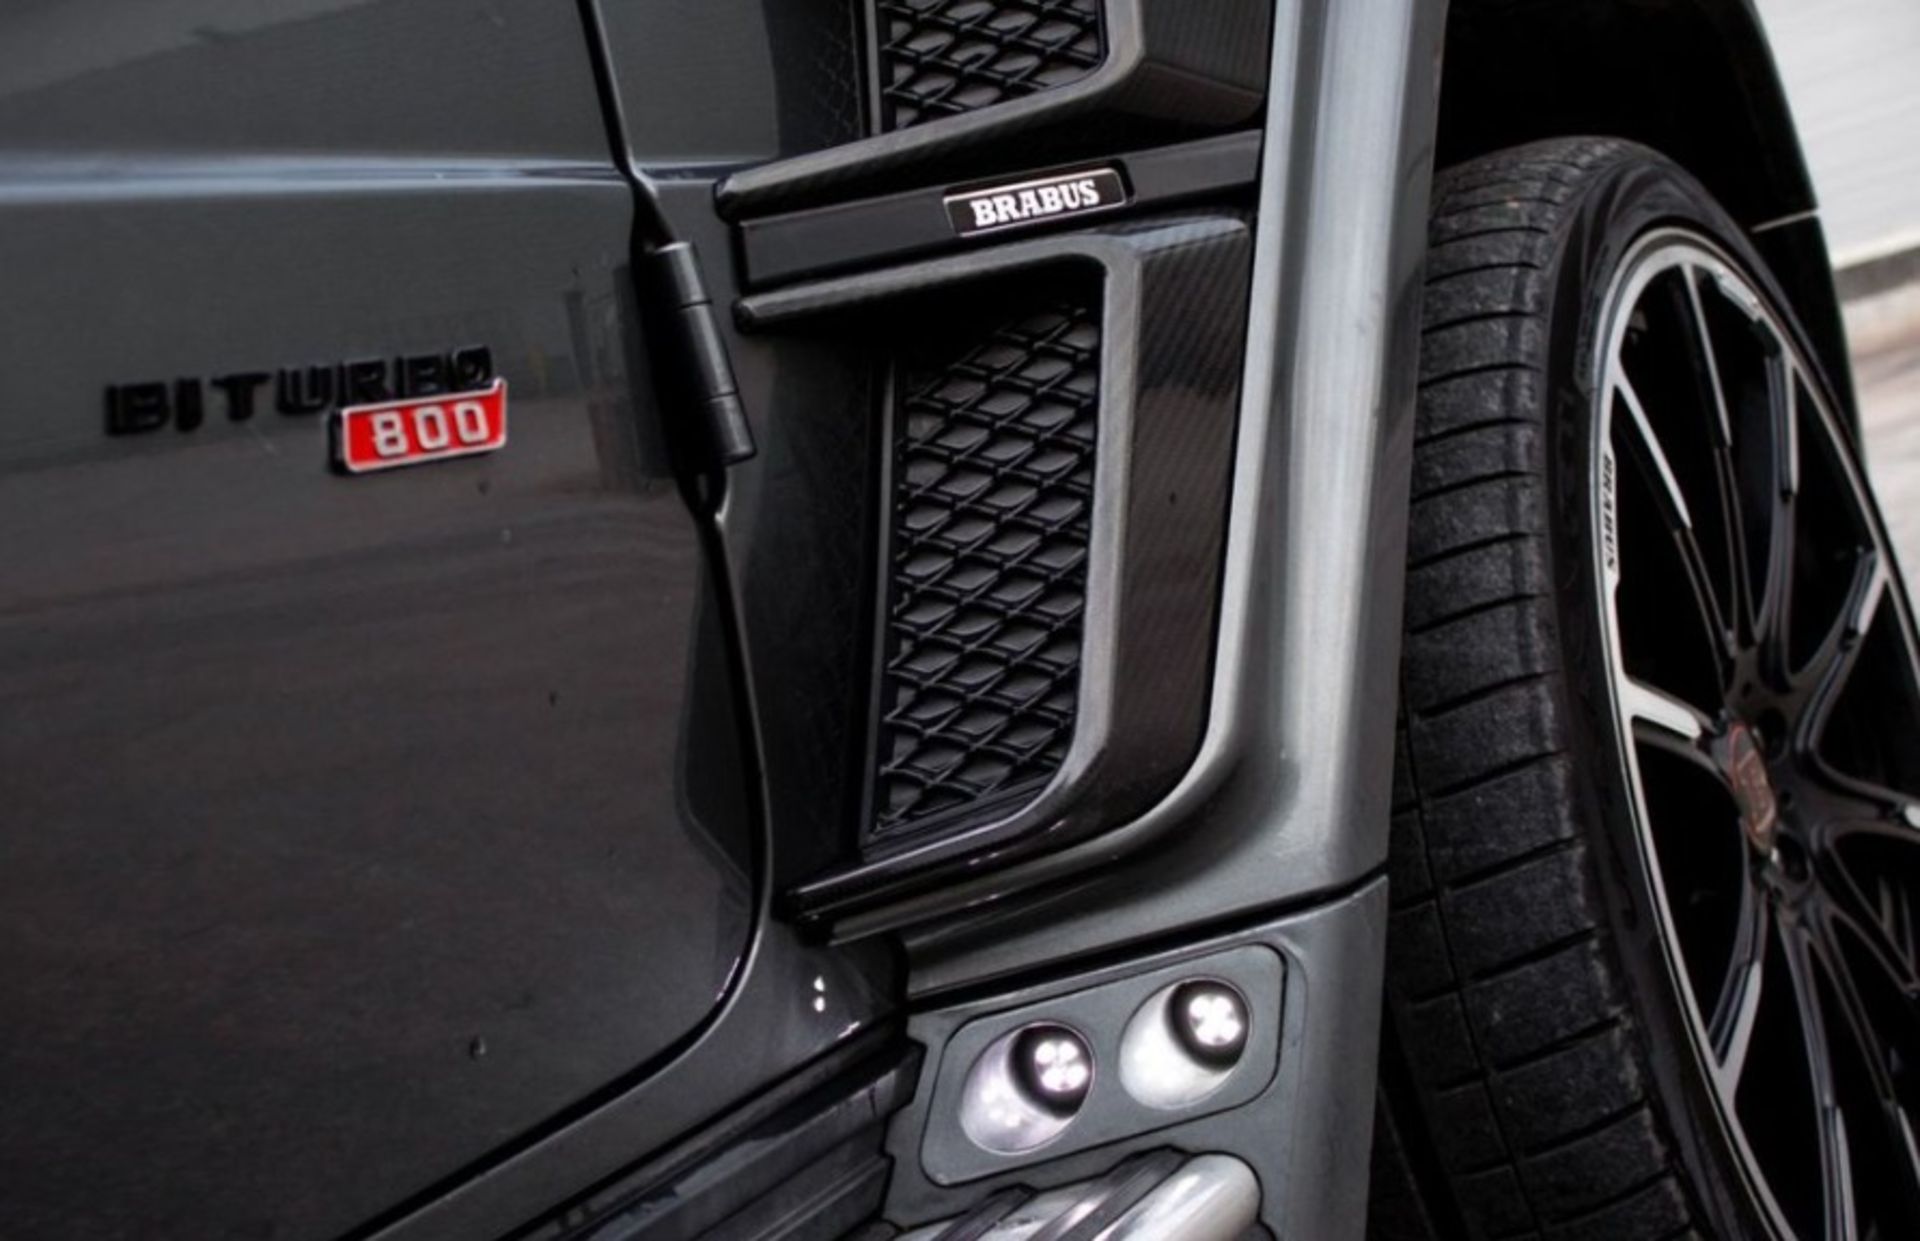 MERCEDES G63 BRABUS WIDE-STAR 800 STYLING GREY WITH BLACK LEATHER INTERIOR - Image 11 of 27